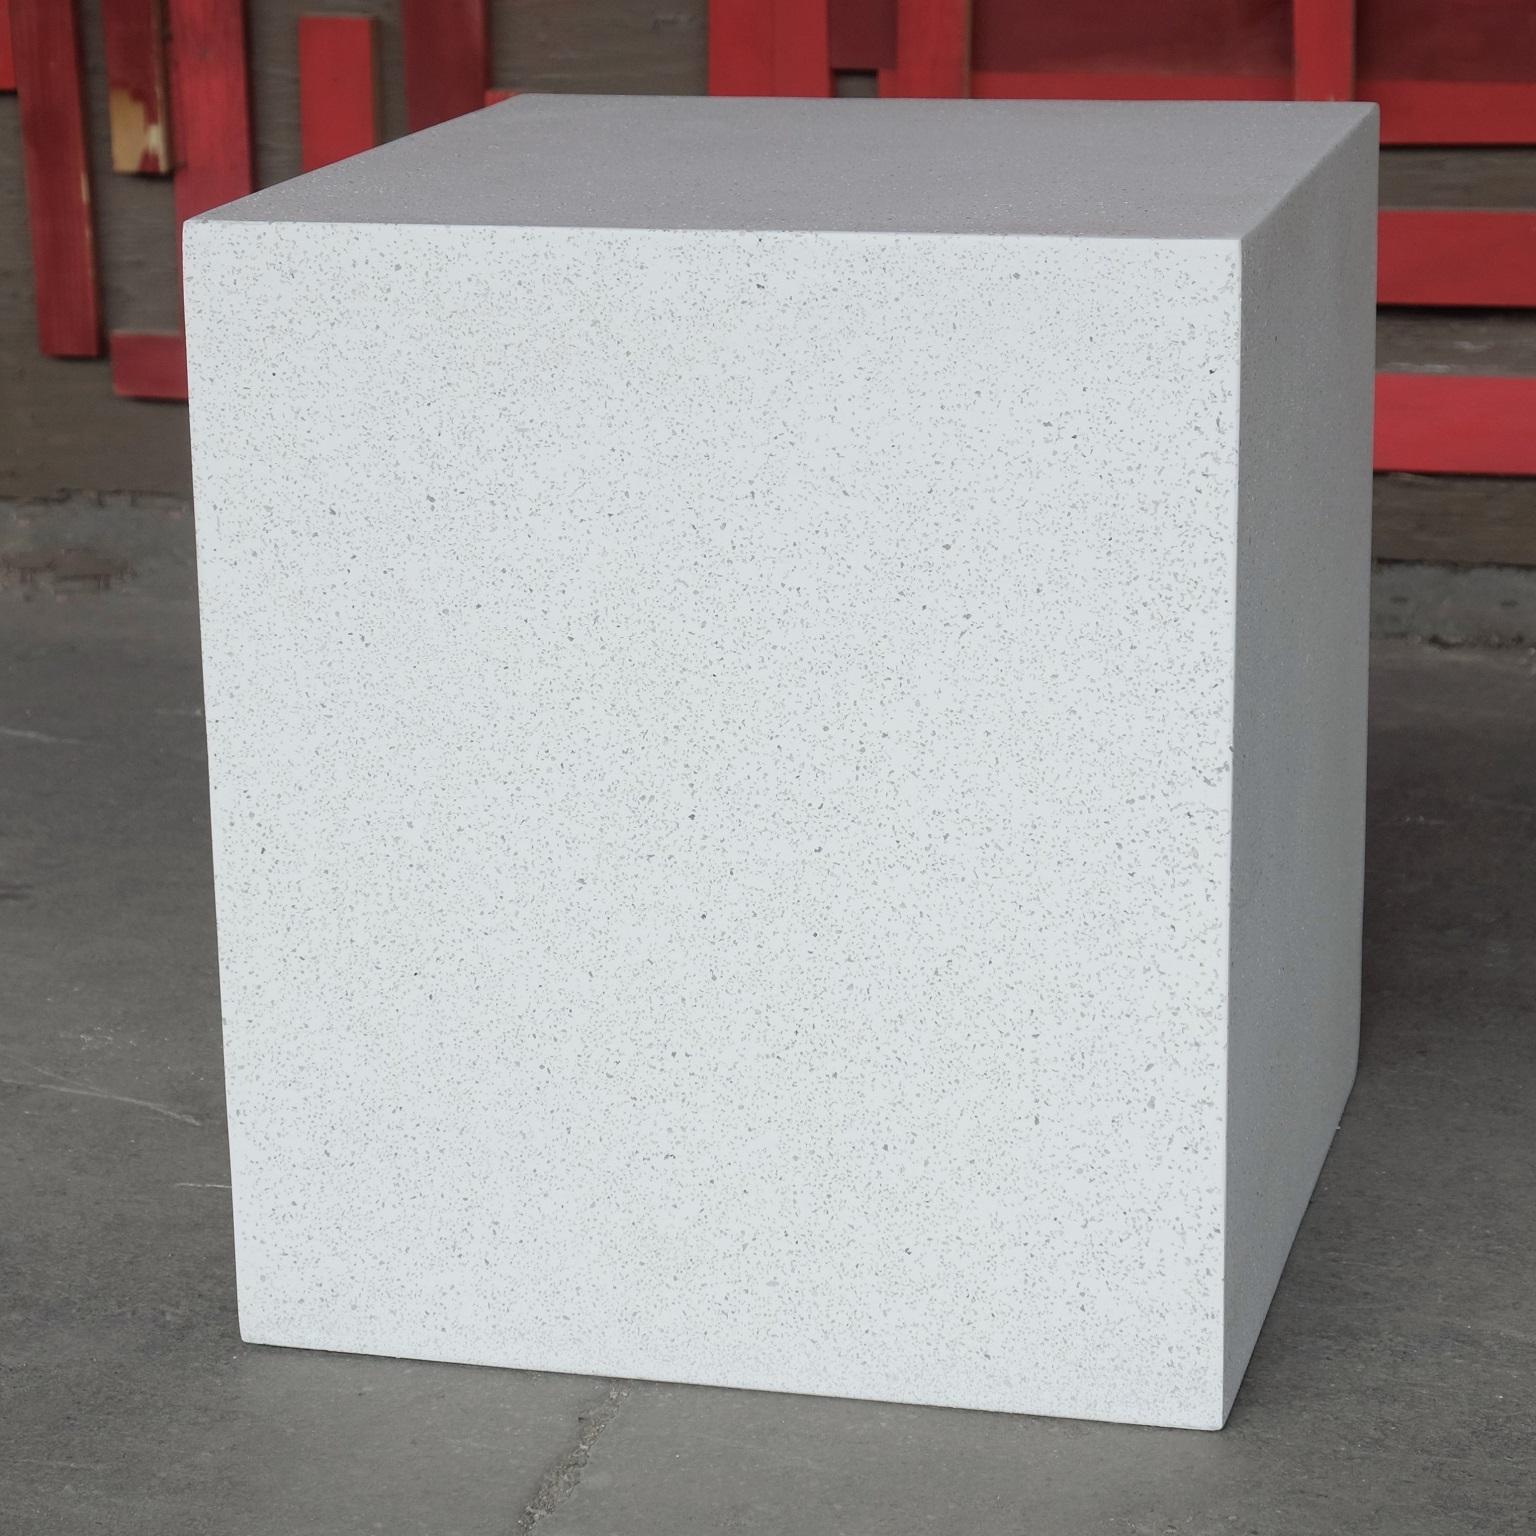 The essence of construction, pulled from the jobsite and refined. This simple block emanates potential, awaiting placement and to serve its assigned role.

Dimensions: Width 14 in. (36 cm), depth 14 in. (36cm), height 18 in. (46 cm). Weight 20 lbs.